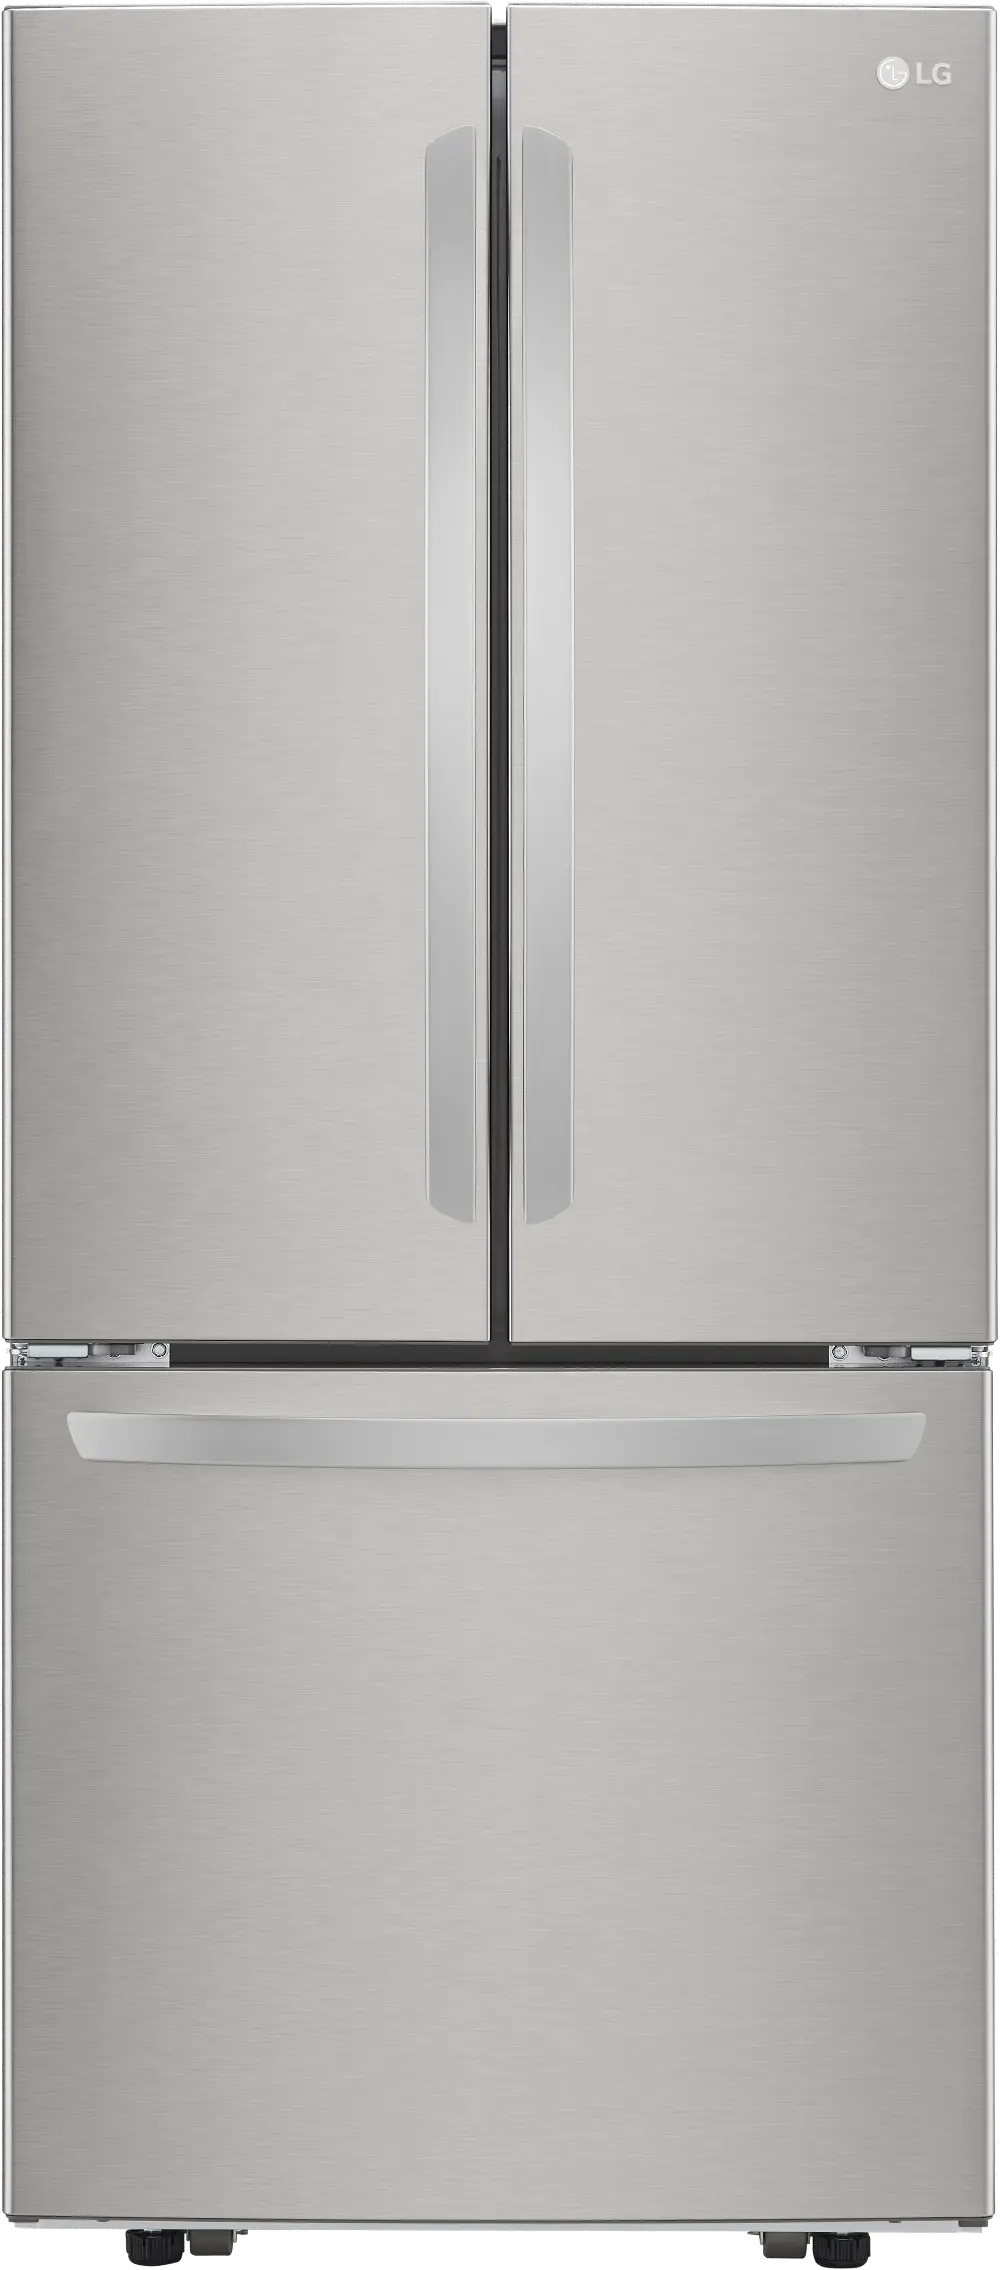 LFCS22520S-PROJECT LG 21.8 cu ft French Door Refrigerator - 30 W Stainless Steel-1